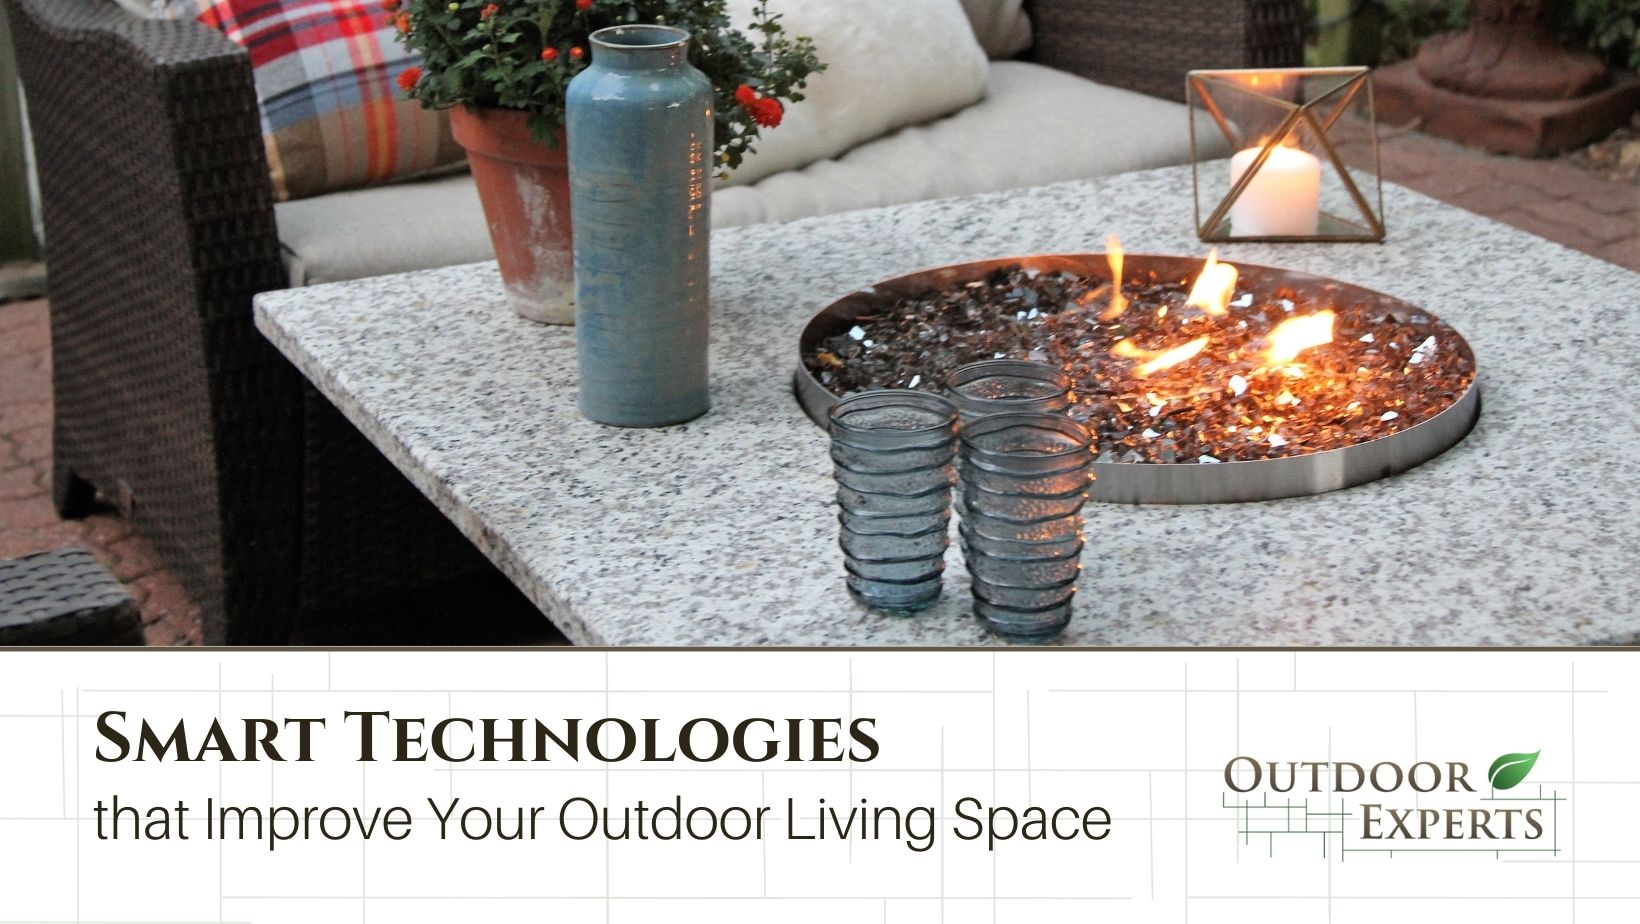 Smart technology that helps with the outdoor spaces